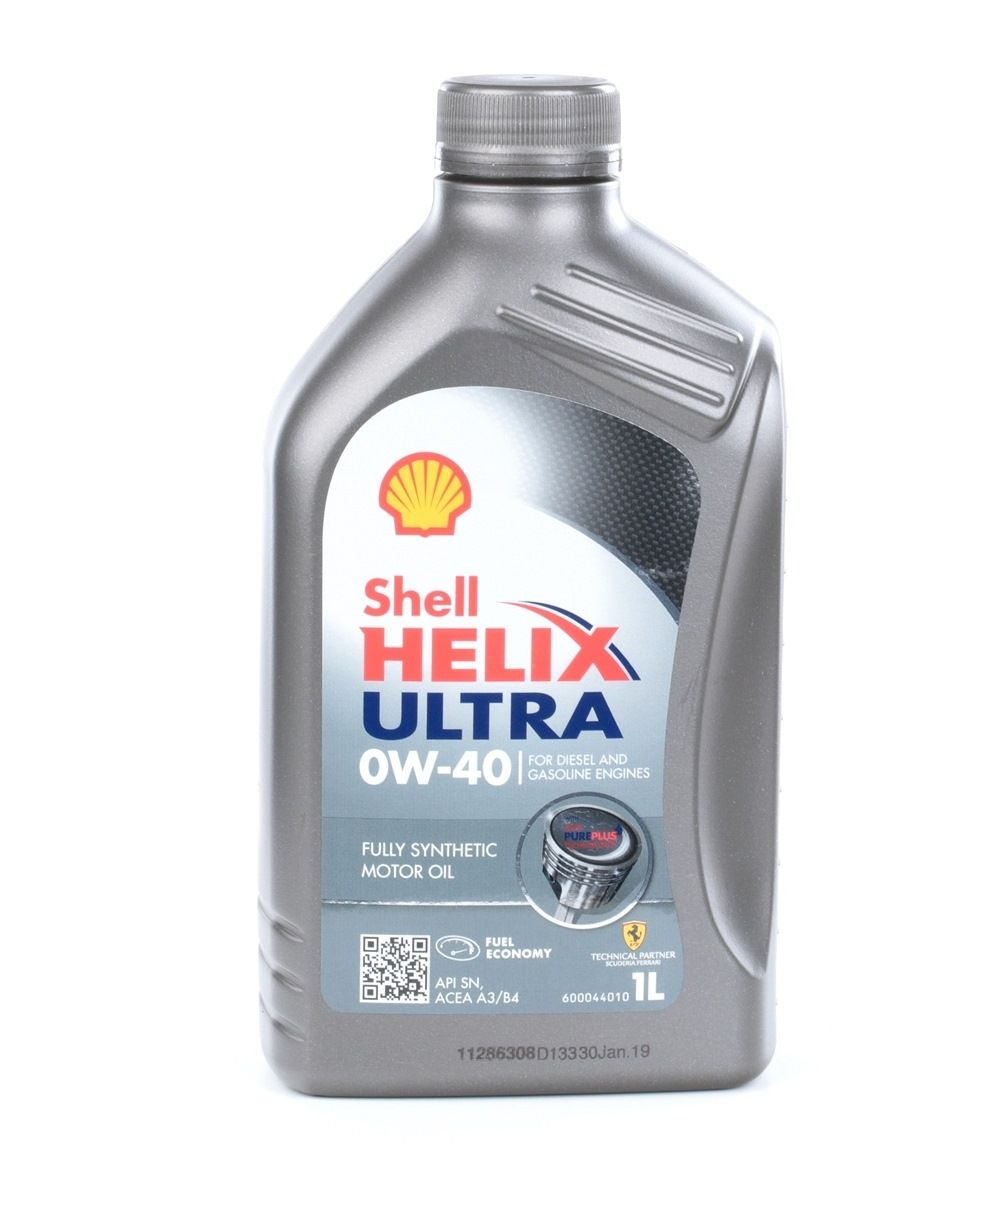 Engine oil MB 229.5 SHELL diesel - 550040565 Helix, Ultra